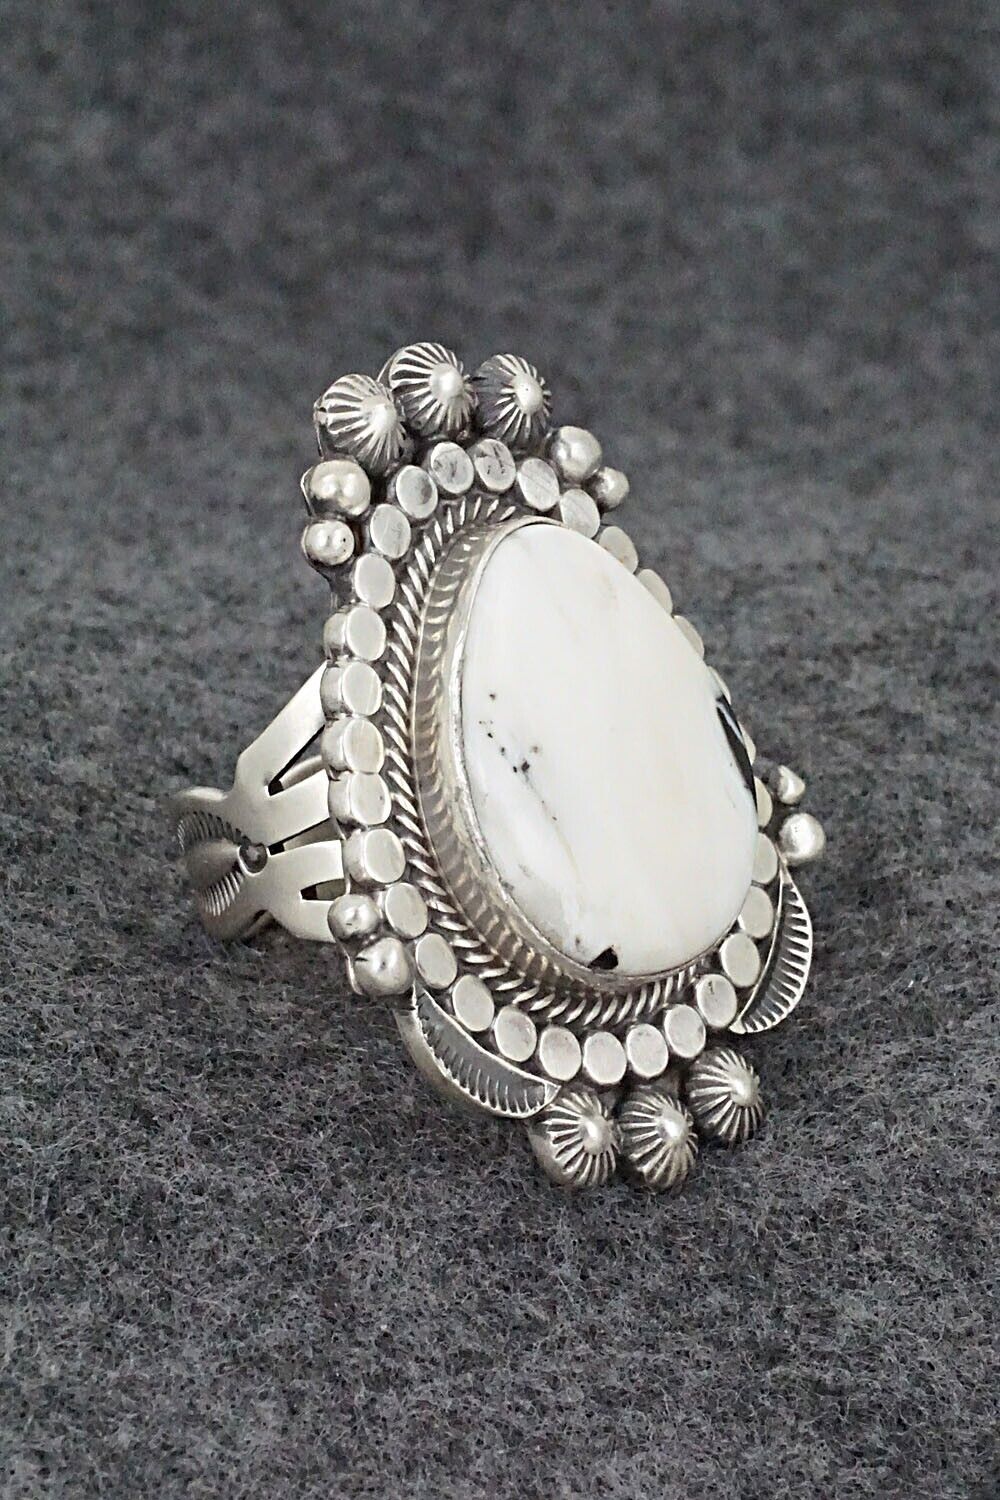 White Buffalo & Sterling Silver Ring - Tom Lewis - Size 9.25